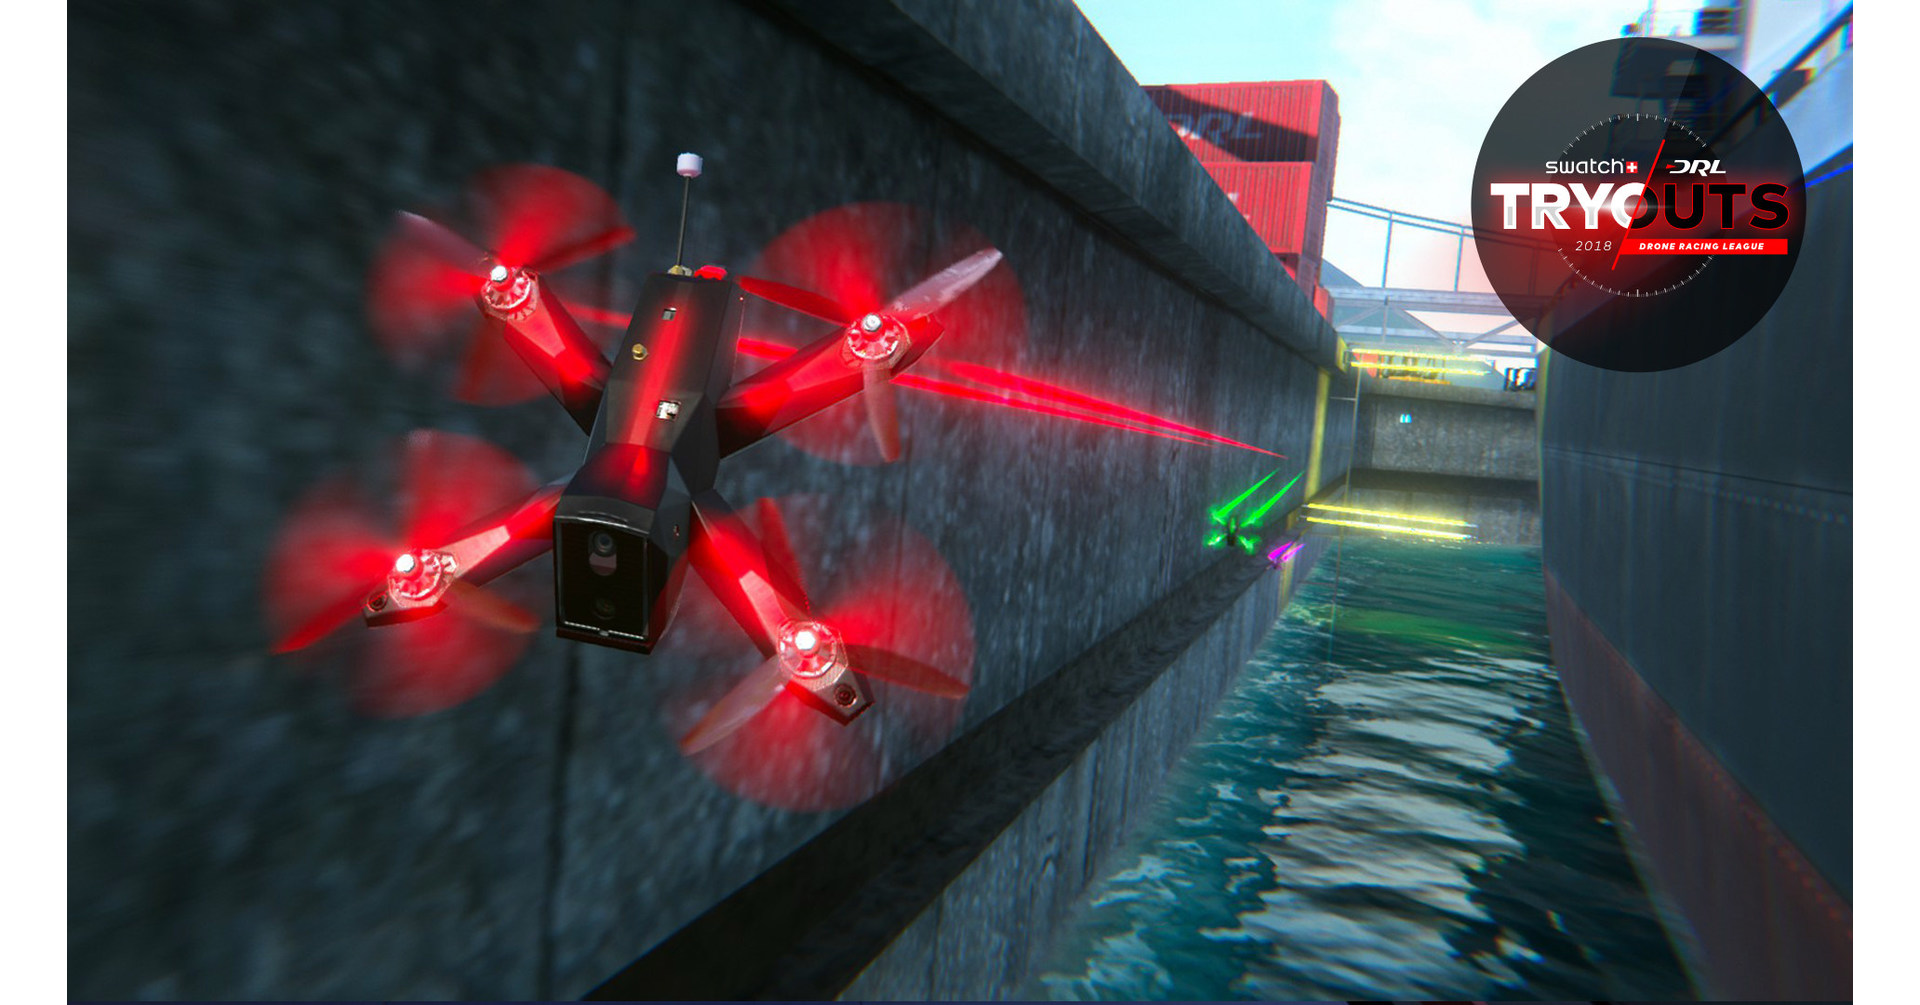 Enlace Comprensión avance The Drone Racing League (DRL) Launches DRL Simulator And Announces 2018  Swatch DRL Tryouts & eSport Tournament